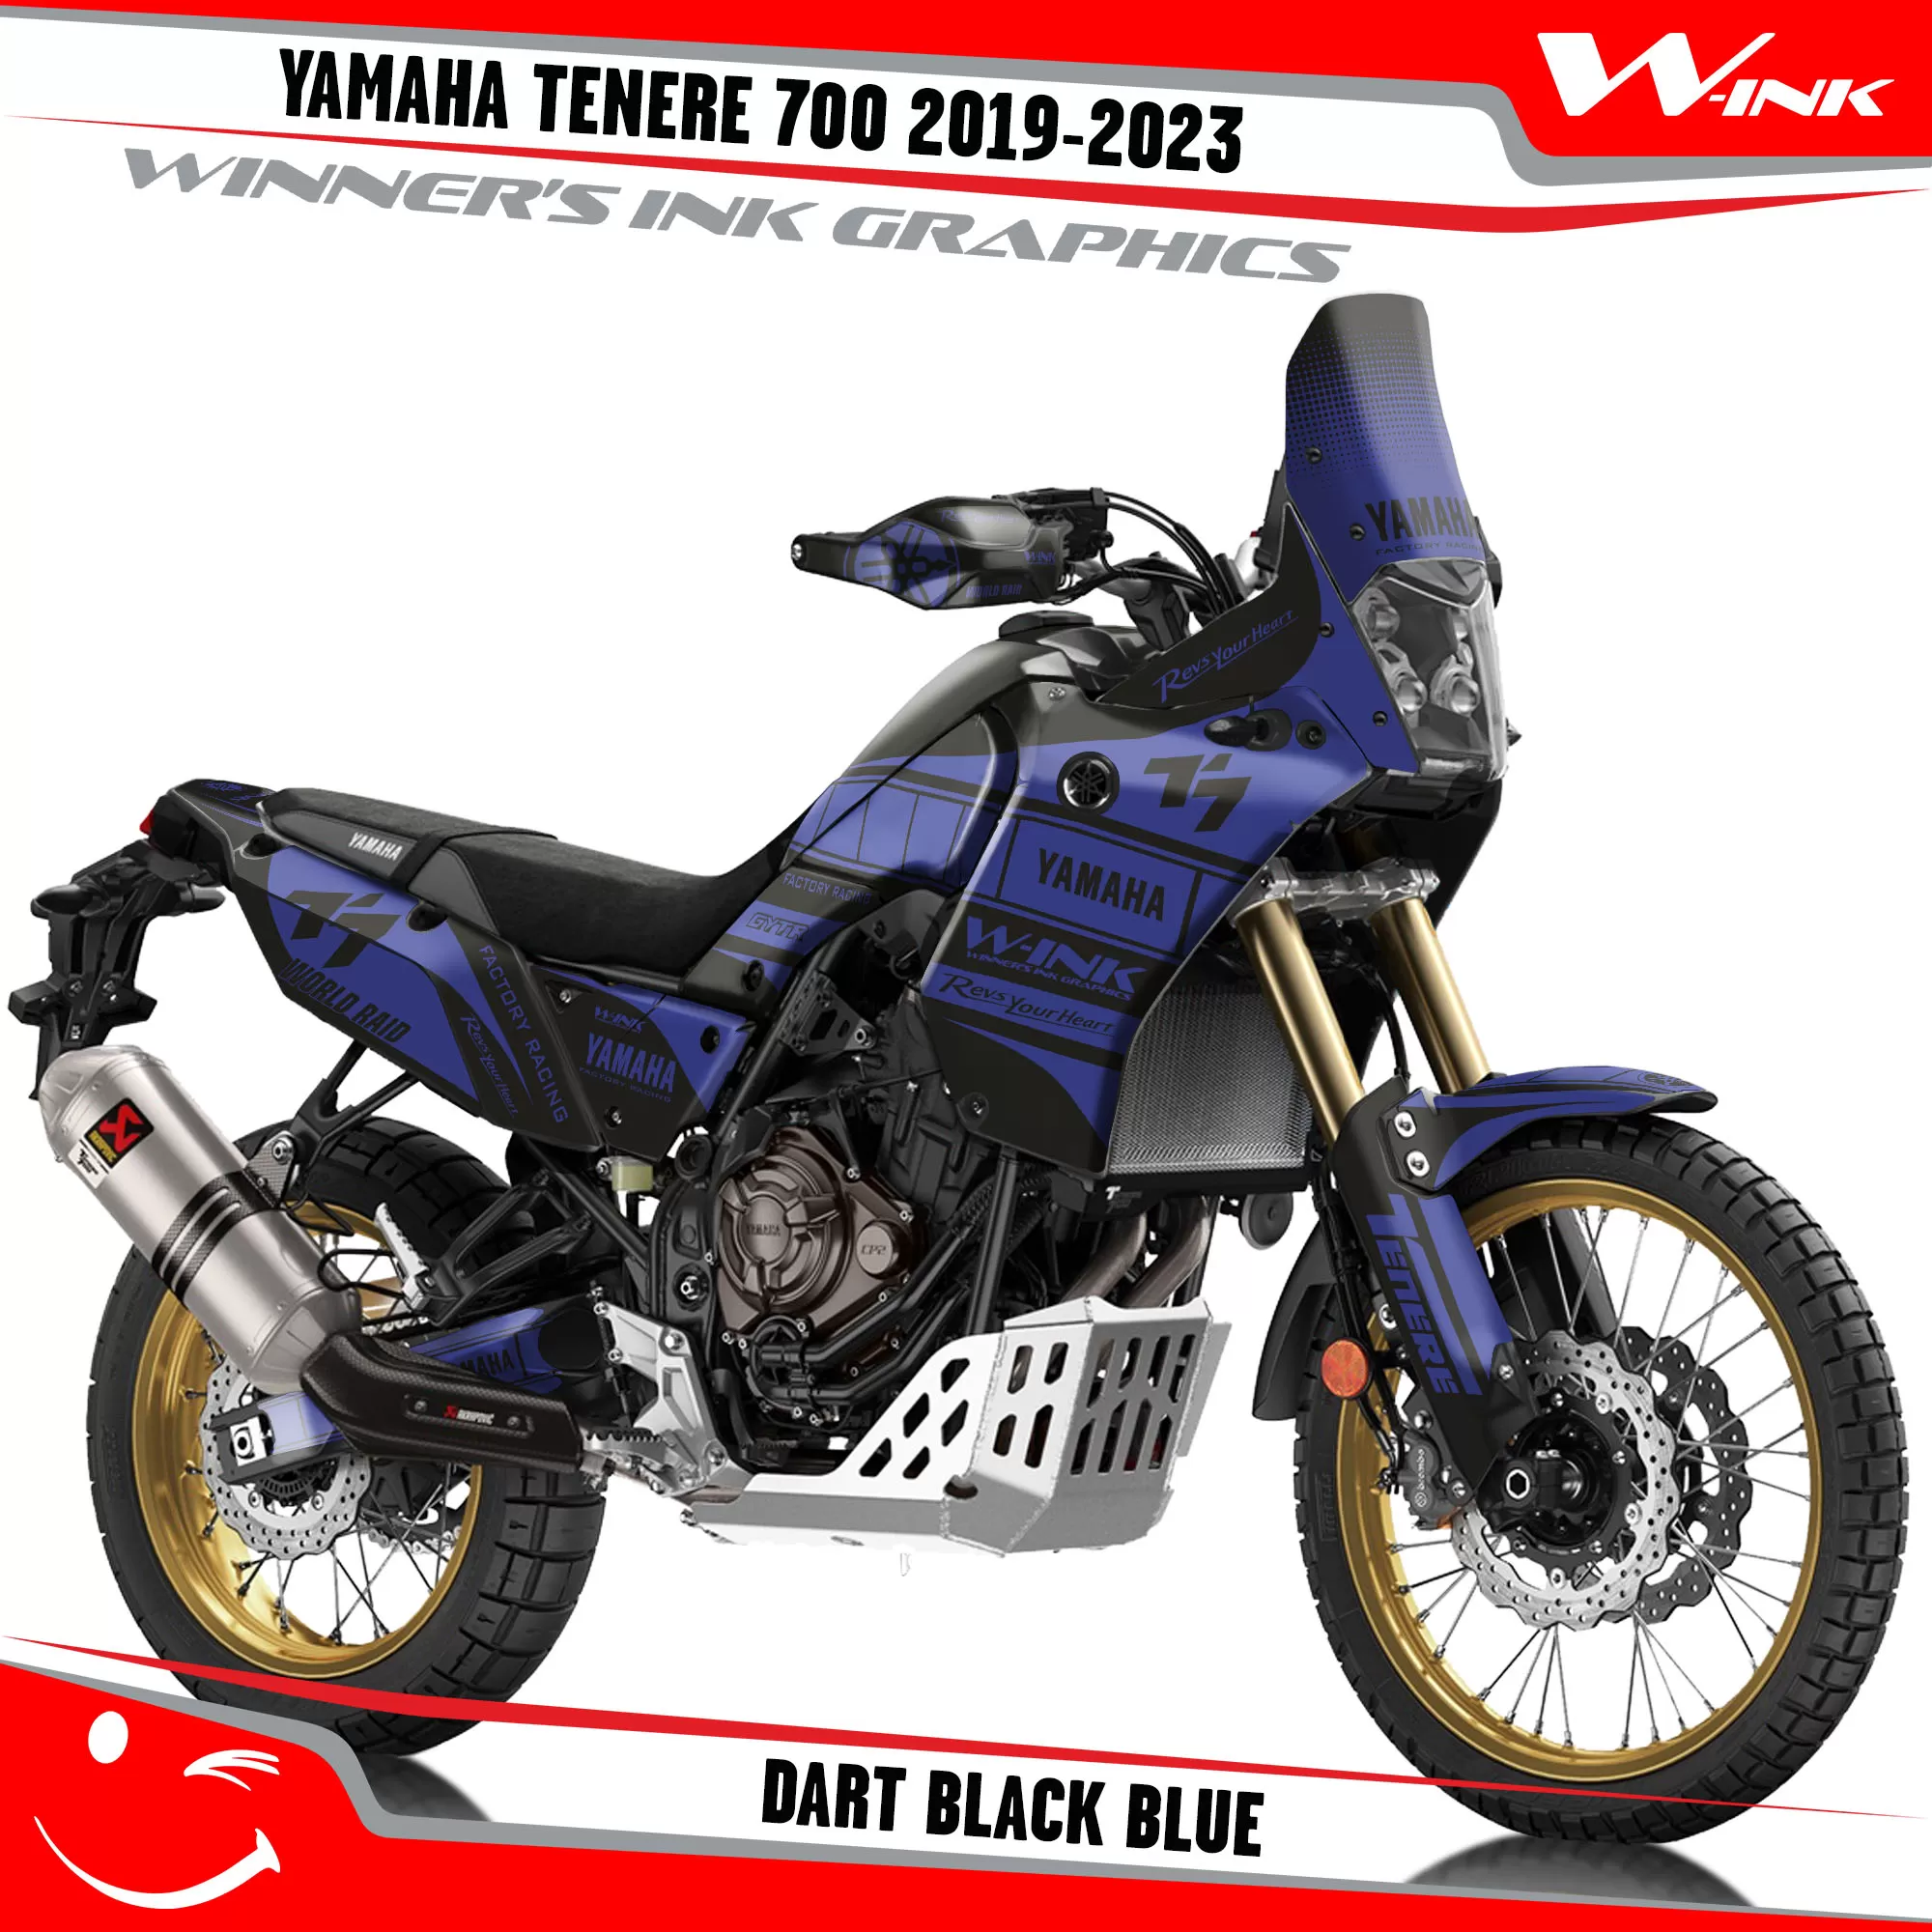 Yamaha-Tenere-700-2019-2020-2021-2022-2023-graphics-kit-and-decals-with-desing-Dart-Full-Black-Blue